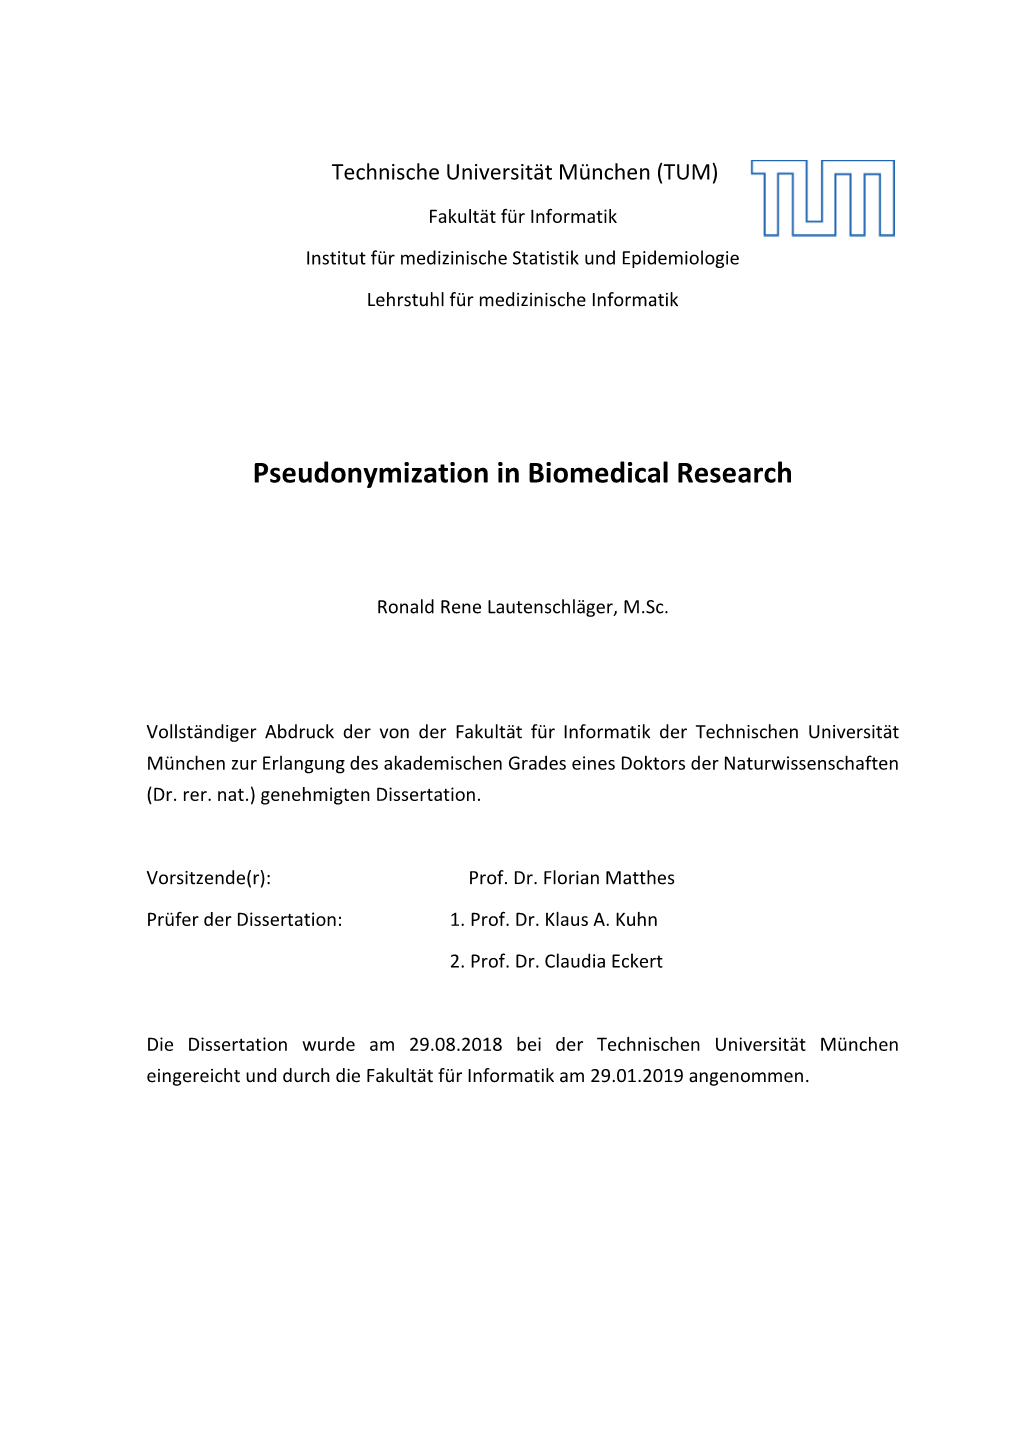 Pseudonymization in Biomedical Research